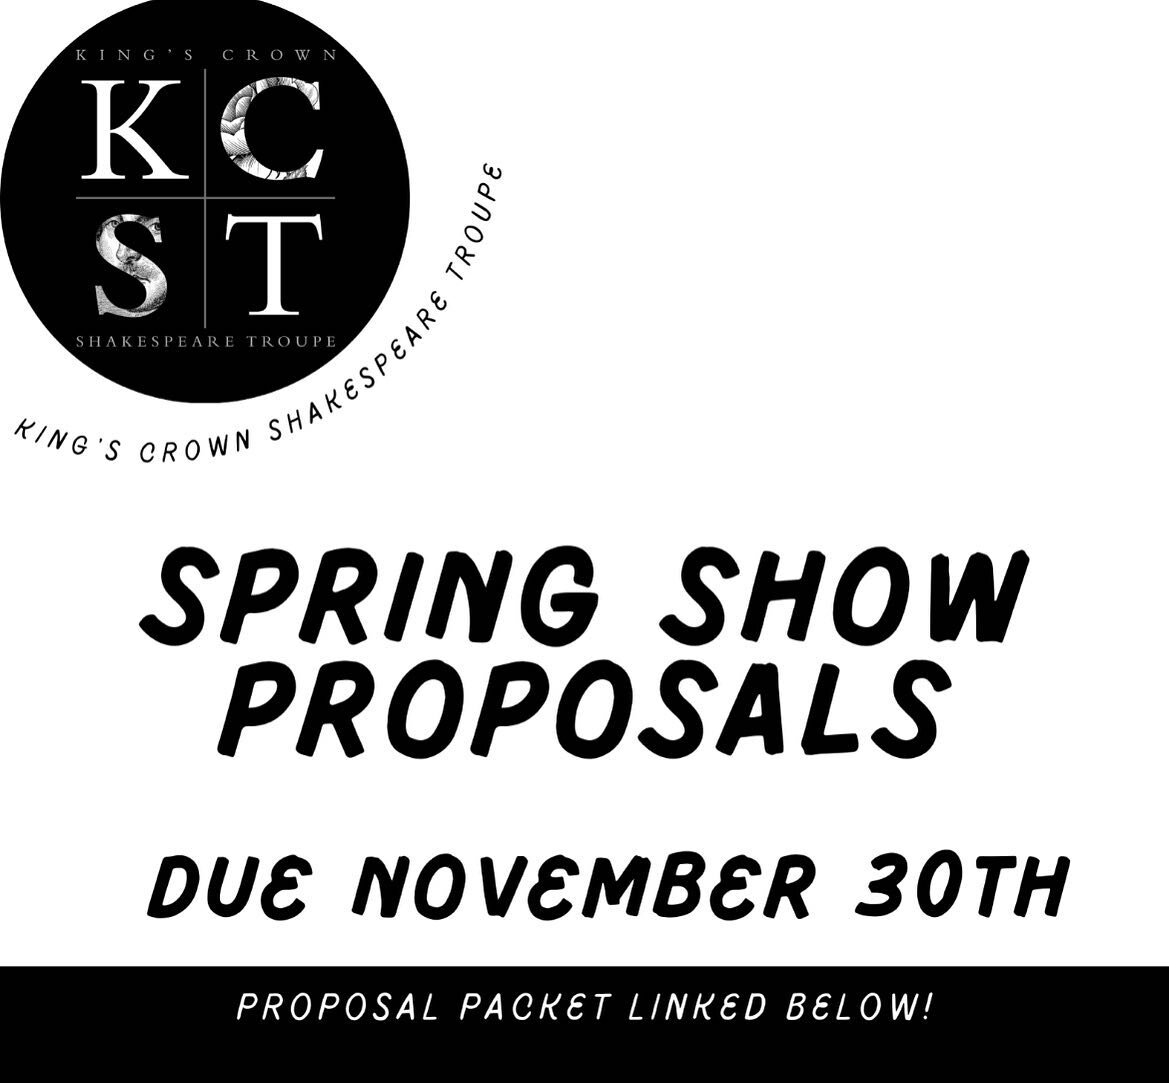 Are you interested in directing KCST&rsquo;s Spring Show??? 

🚨🚨If so, show proposals are due this WEDNESDAY, NOVEMBER 30TH AT 11:59PM 🚨🚨

More information concerning the proposal process can be found here: 
https://docs.google.com/document/d/1Lg